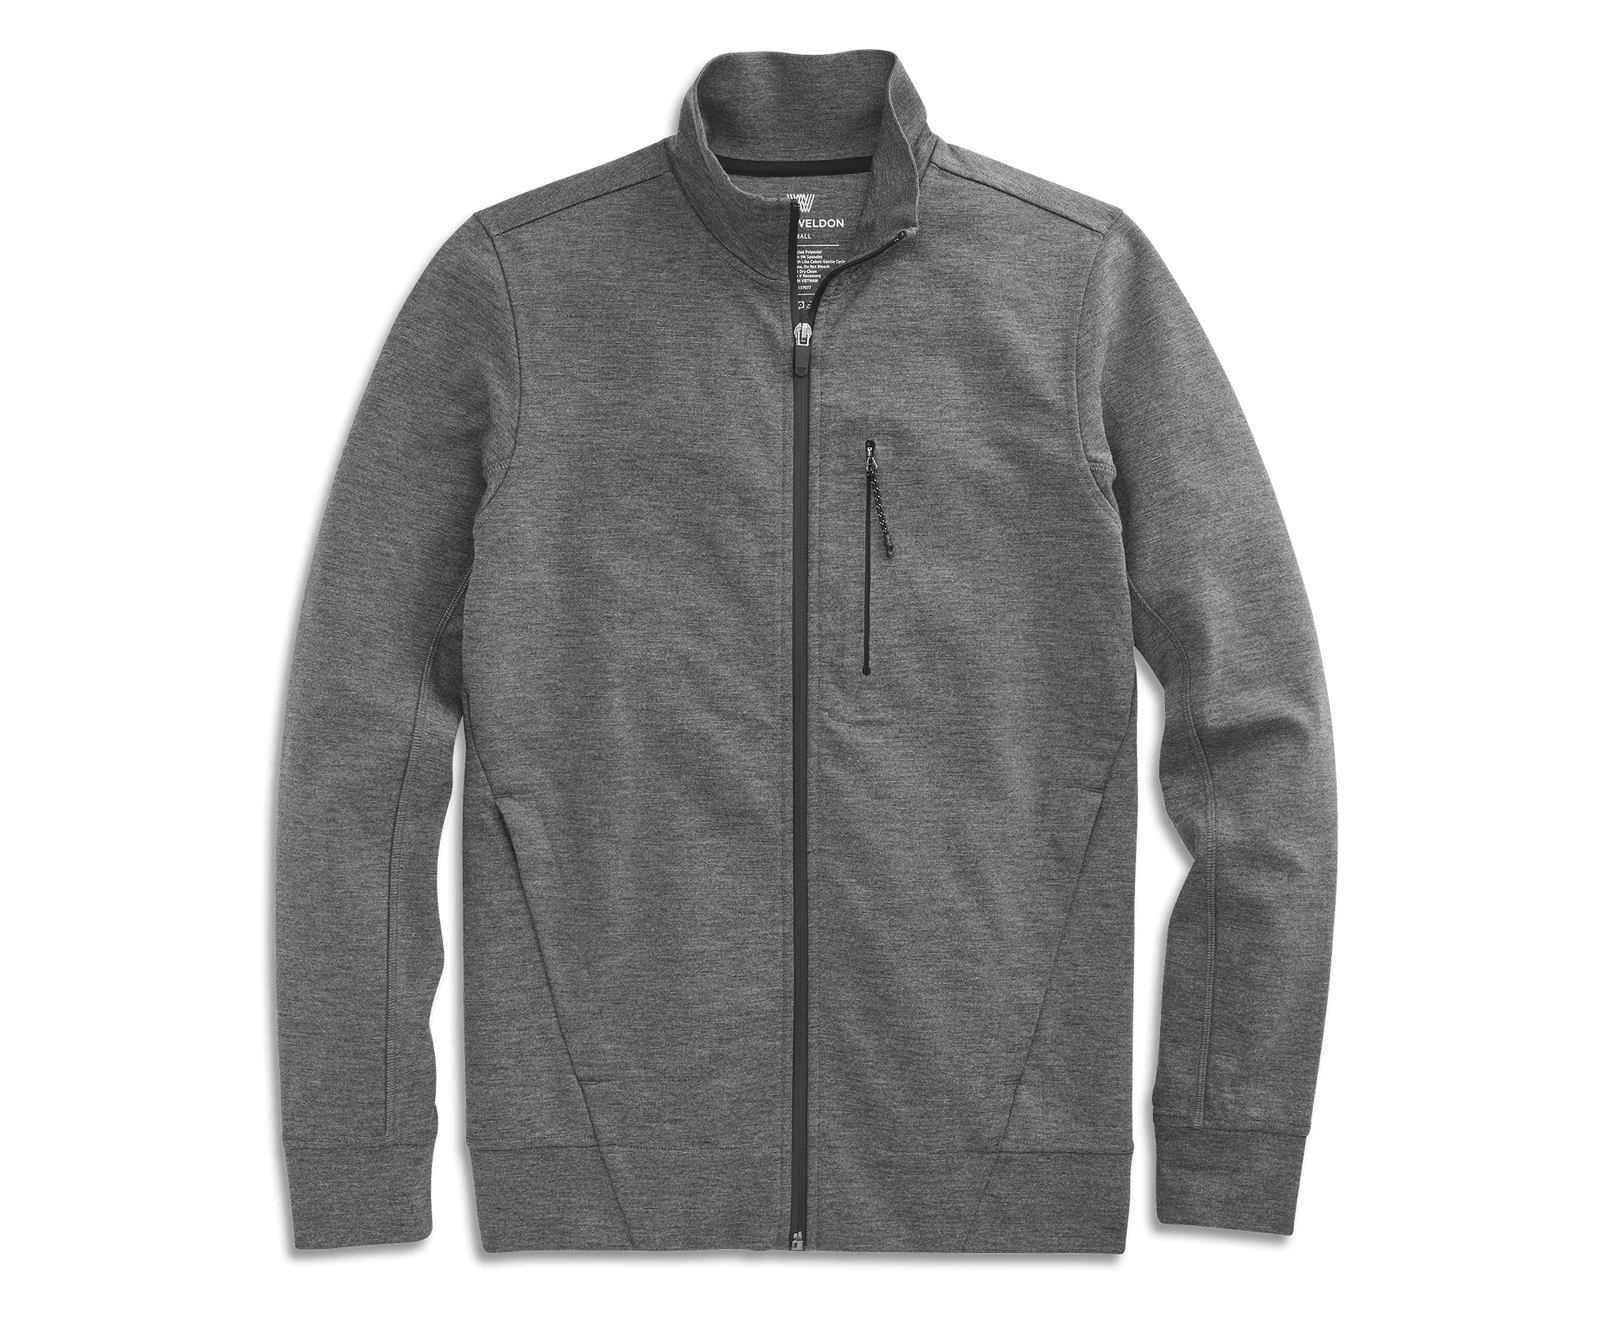 Best casual everyday jacket for men.